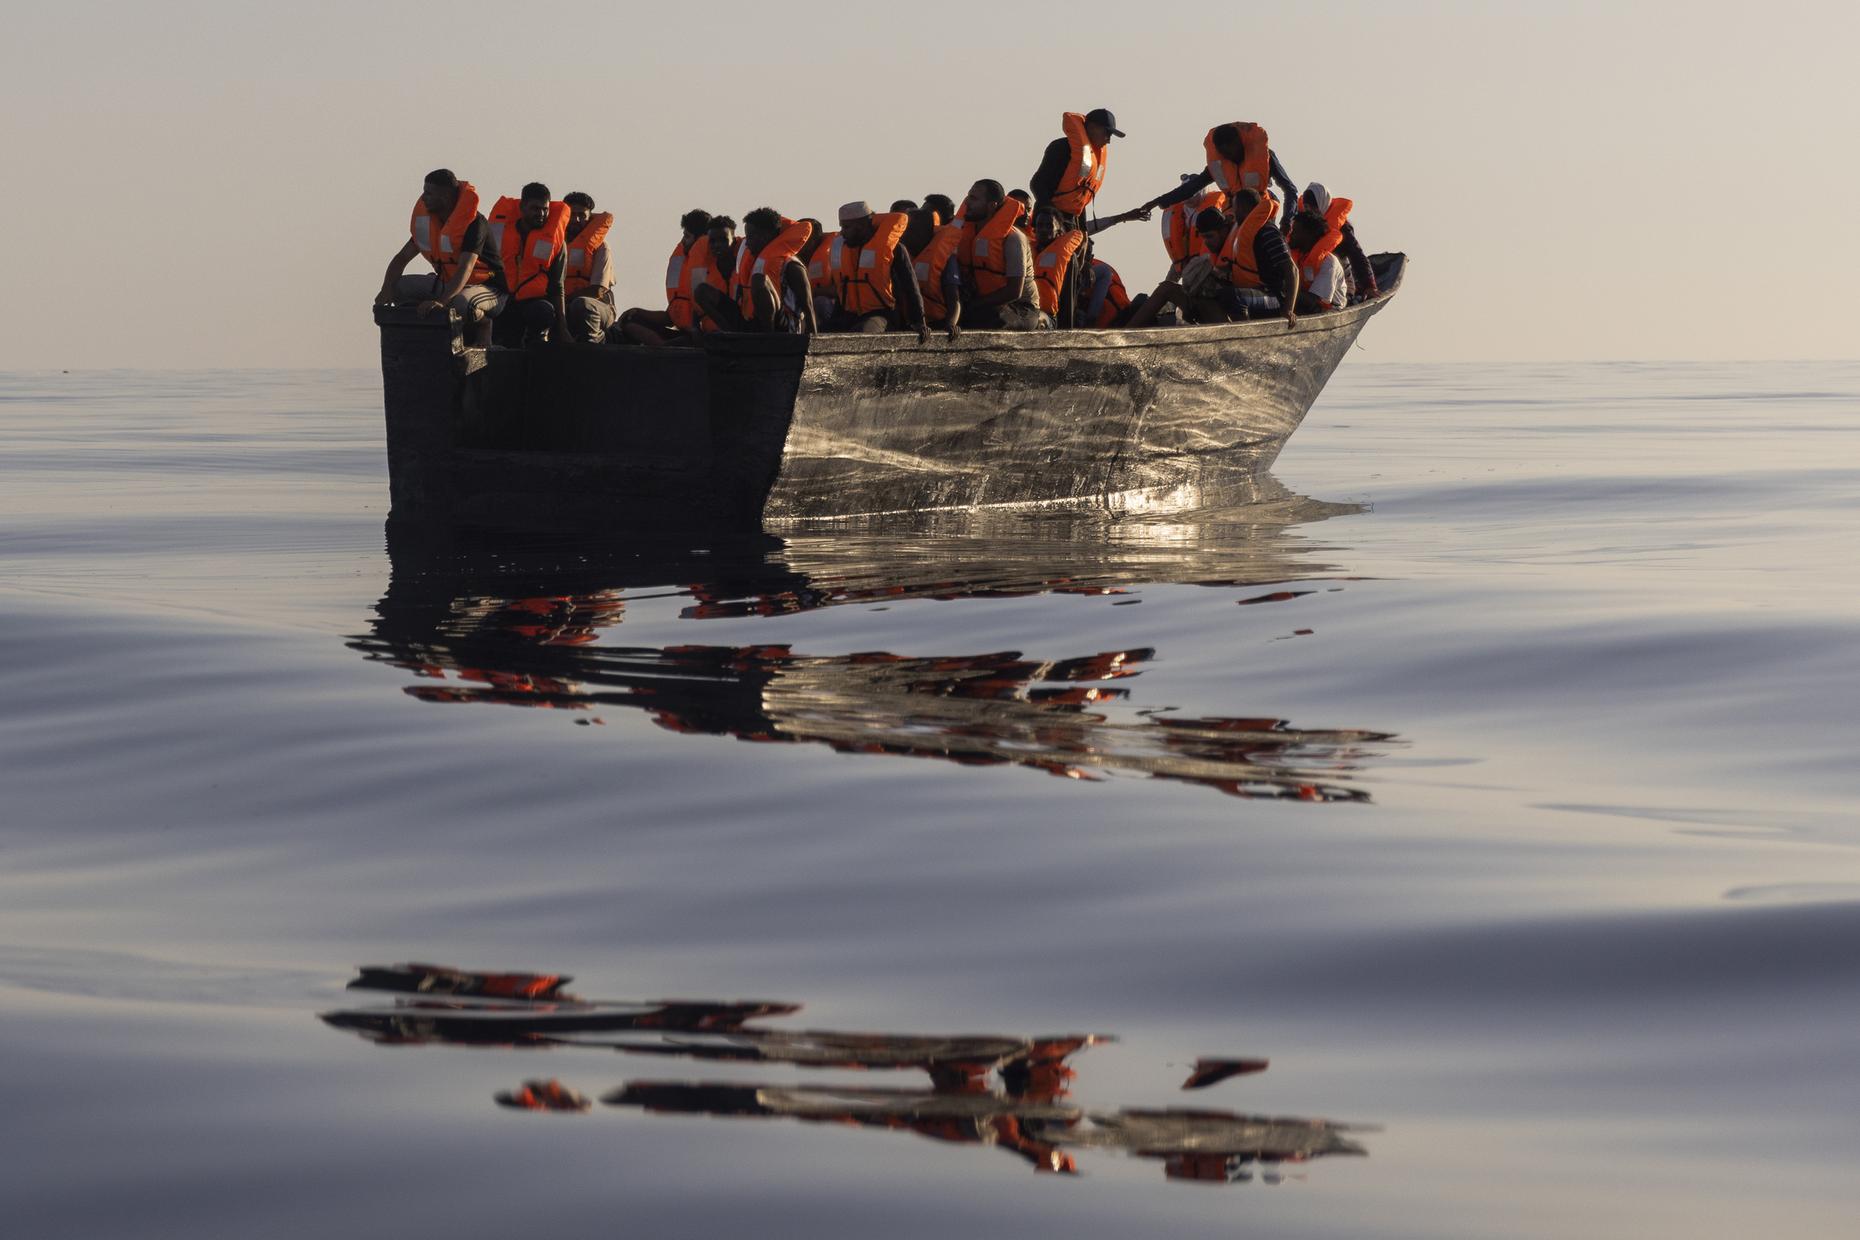 Nearly 2,000 migrants have died crossing the Mediterranean this